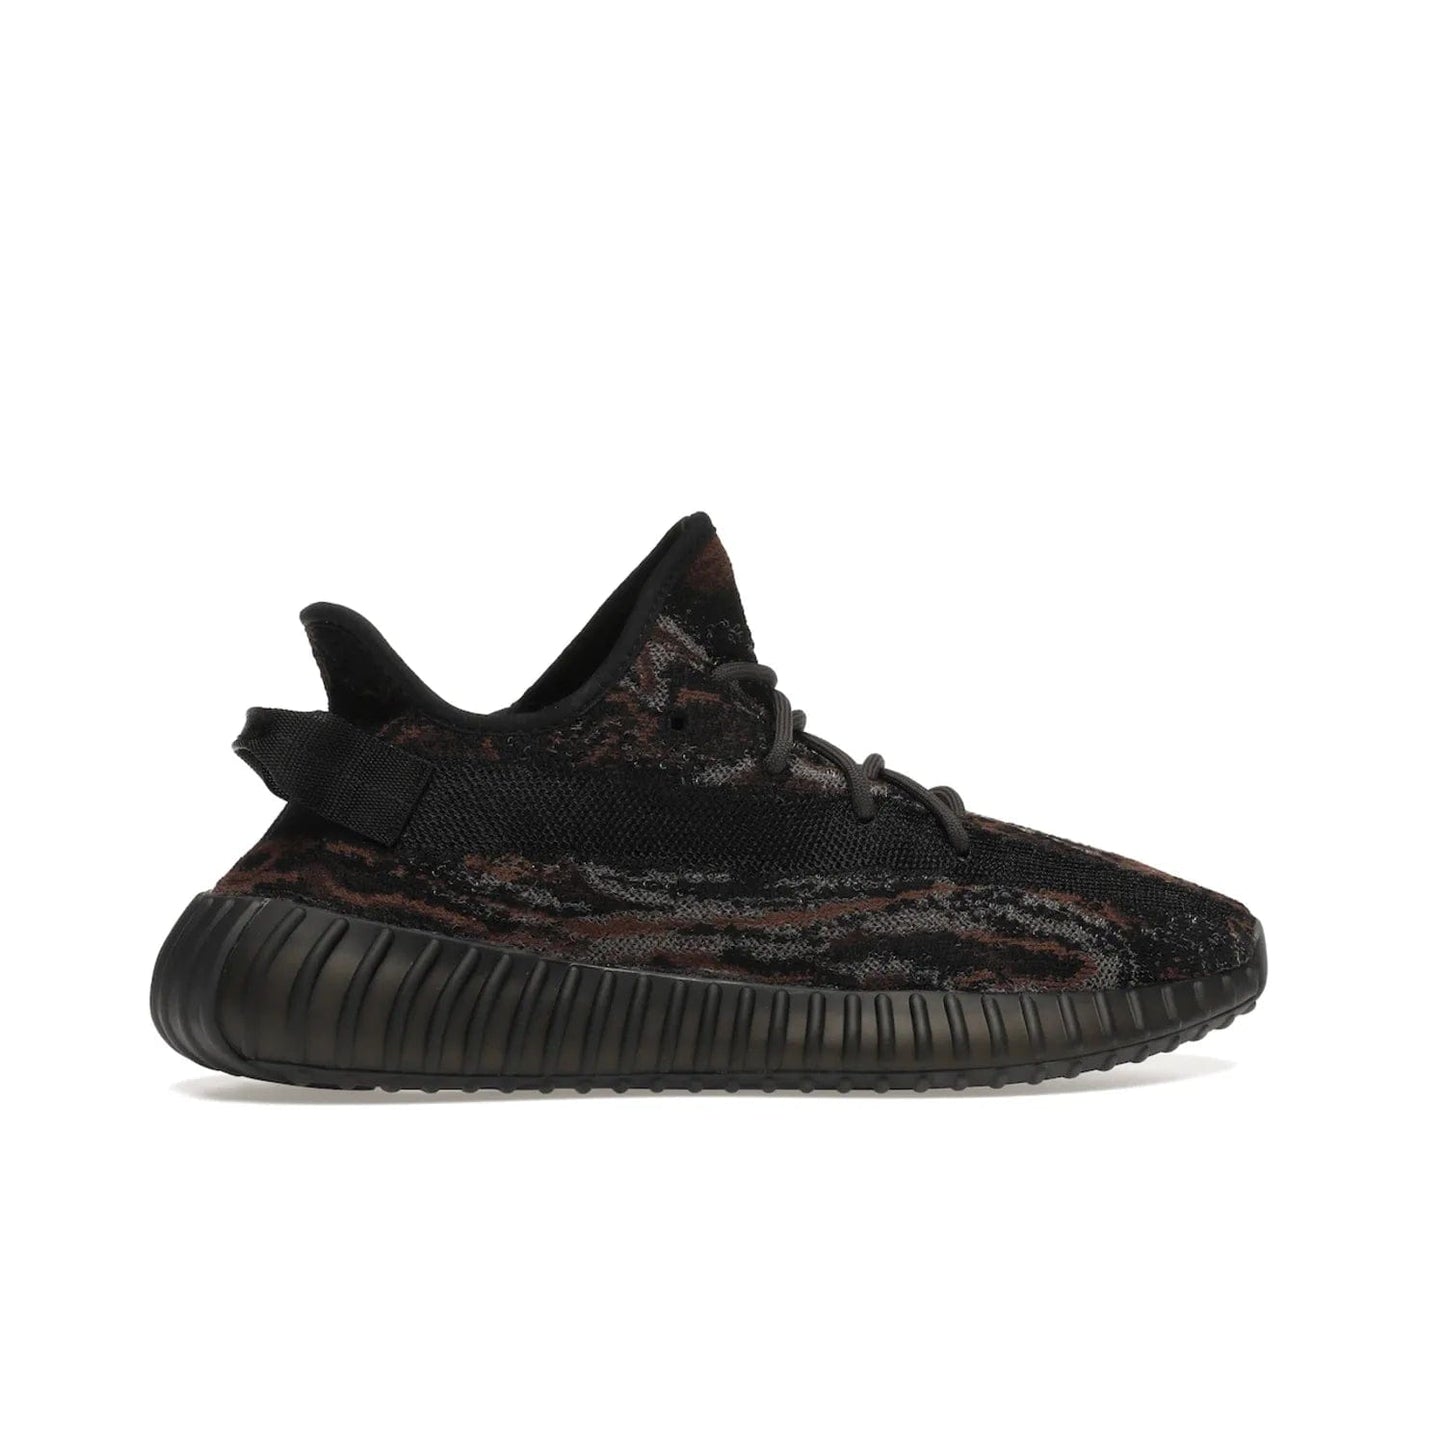 adidas Yeezy Boost 350 V2 MX Rock - Image 36 - Only at www.BallersClubKickz.com - The adidas Yeezy Boost 350 V2 MX Rock features a stylish marbled upper of black, grey, and brown tones. Shop the signature Boost sole, heel tab, and mesh side stripe now, available December of 2021.